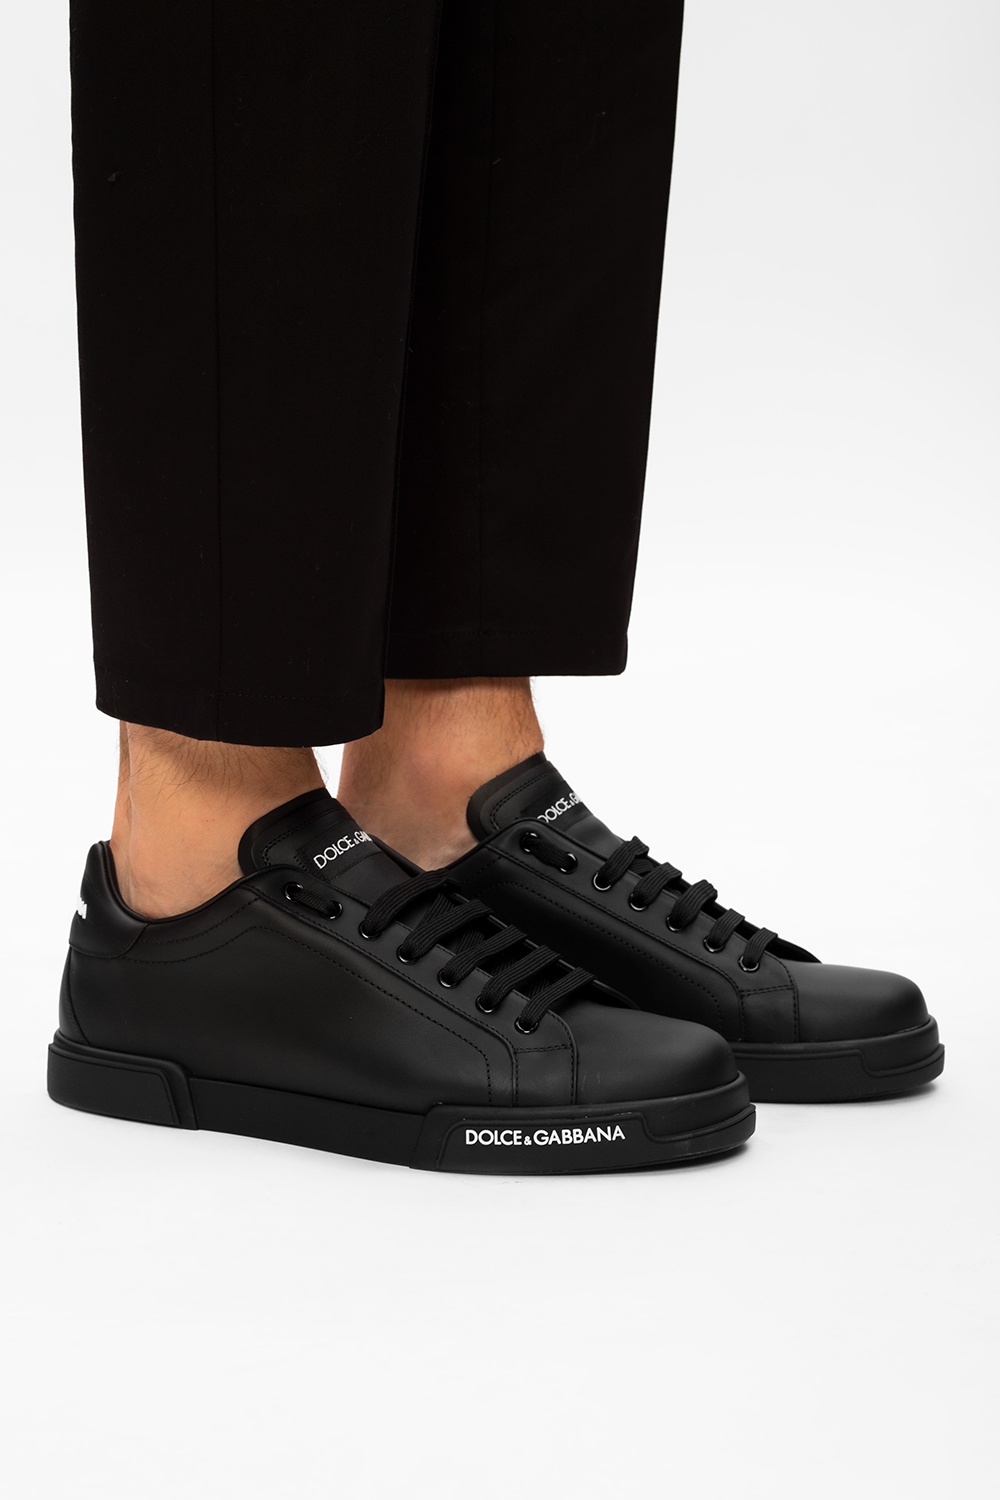 dolce and gabbana black sneakers